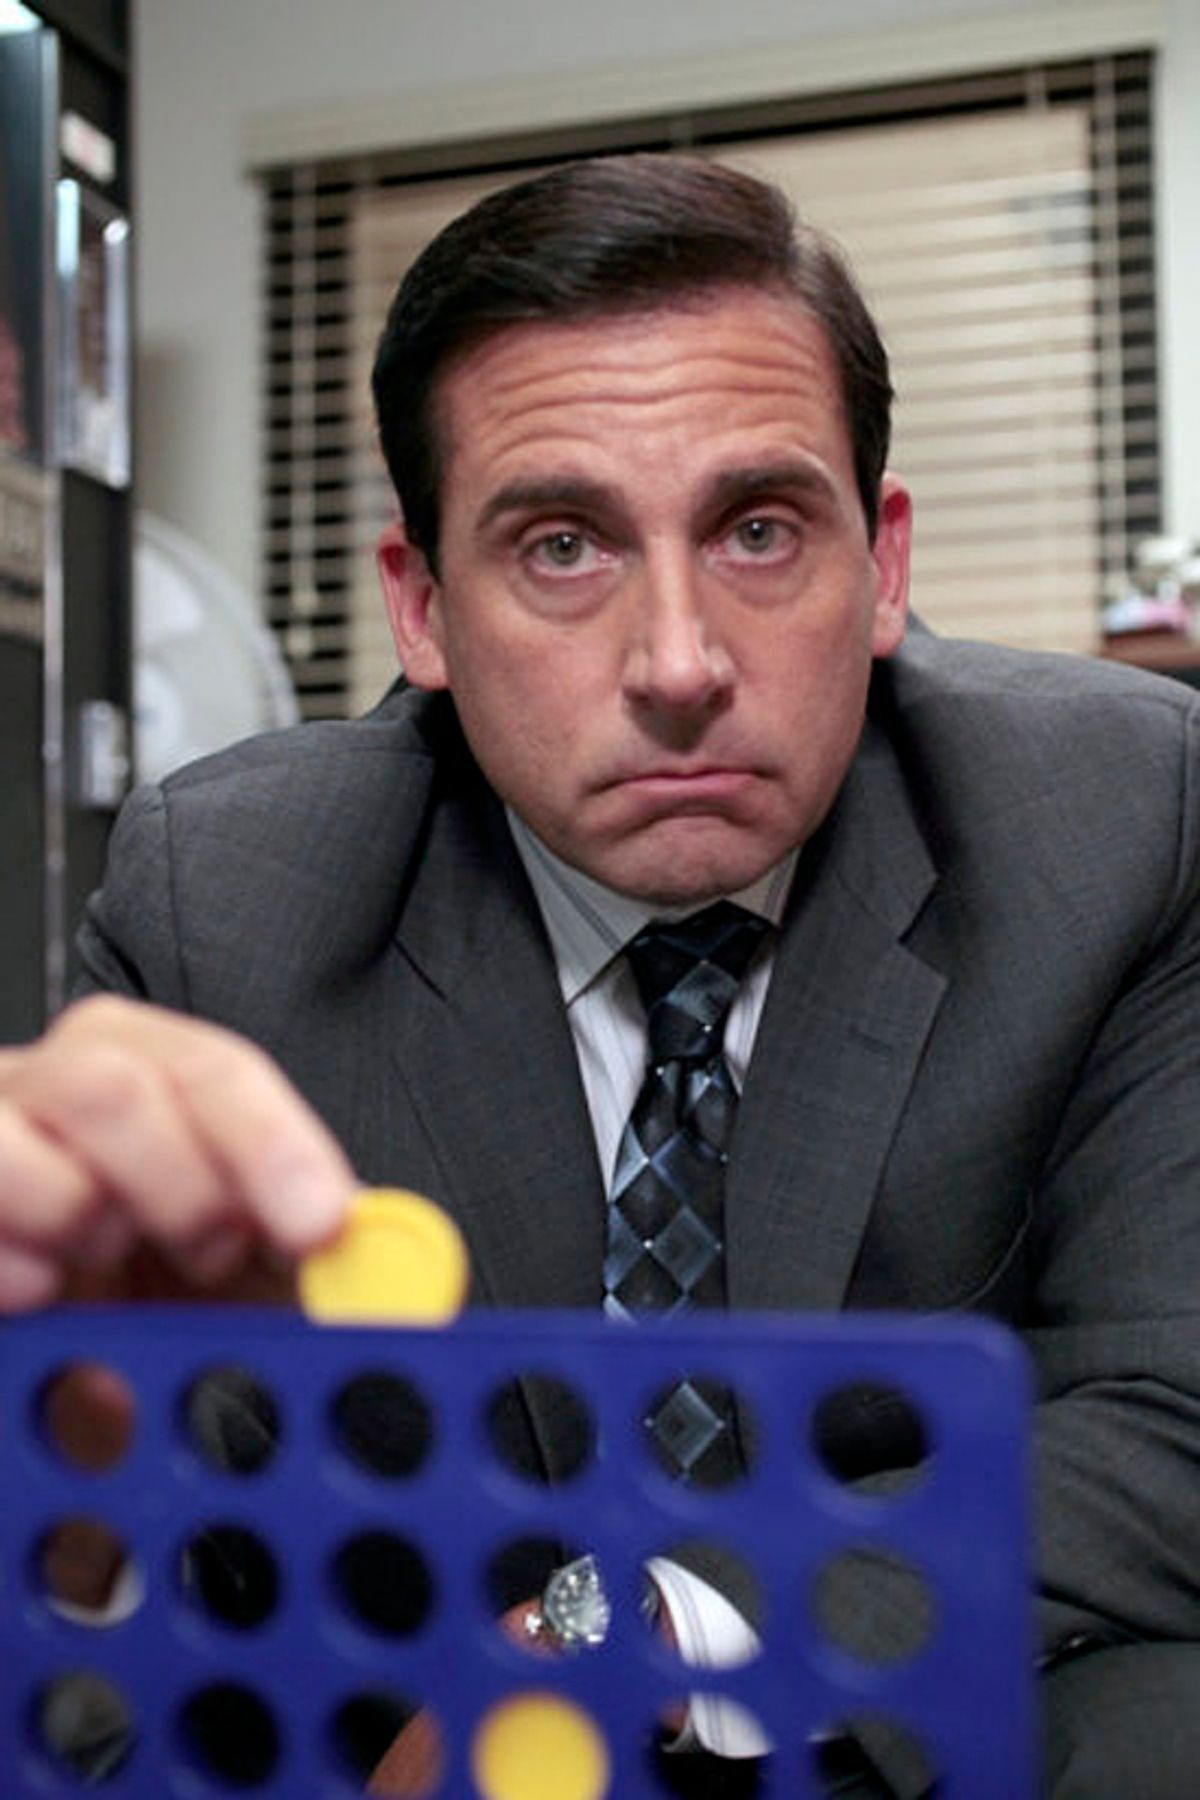 THE OFFICE -- "Counseling" Episode 702 -- Pictured: Steve Carell as Michael Scott -- Photo by: Chris Haston/NBC (Chris Haston)